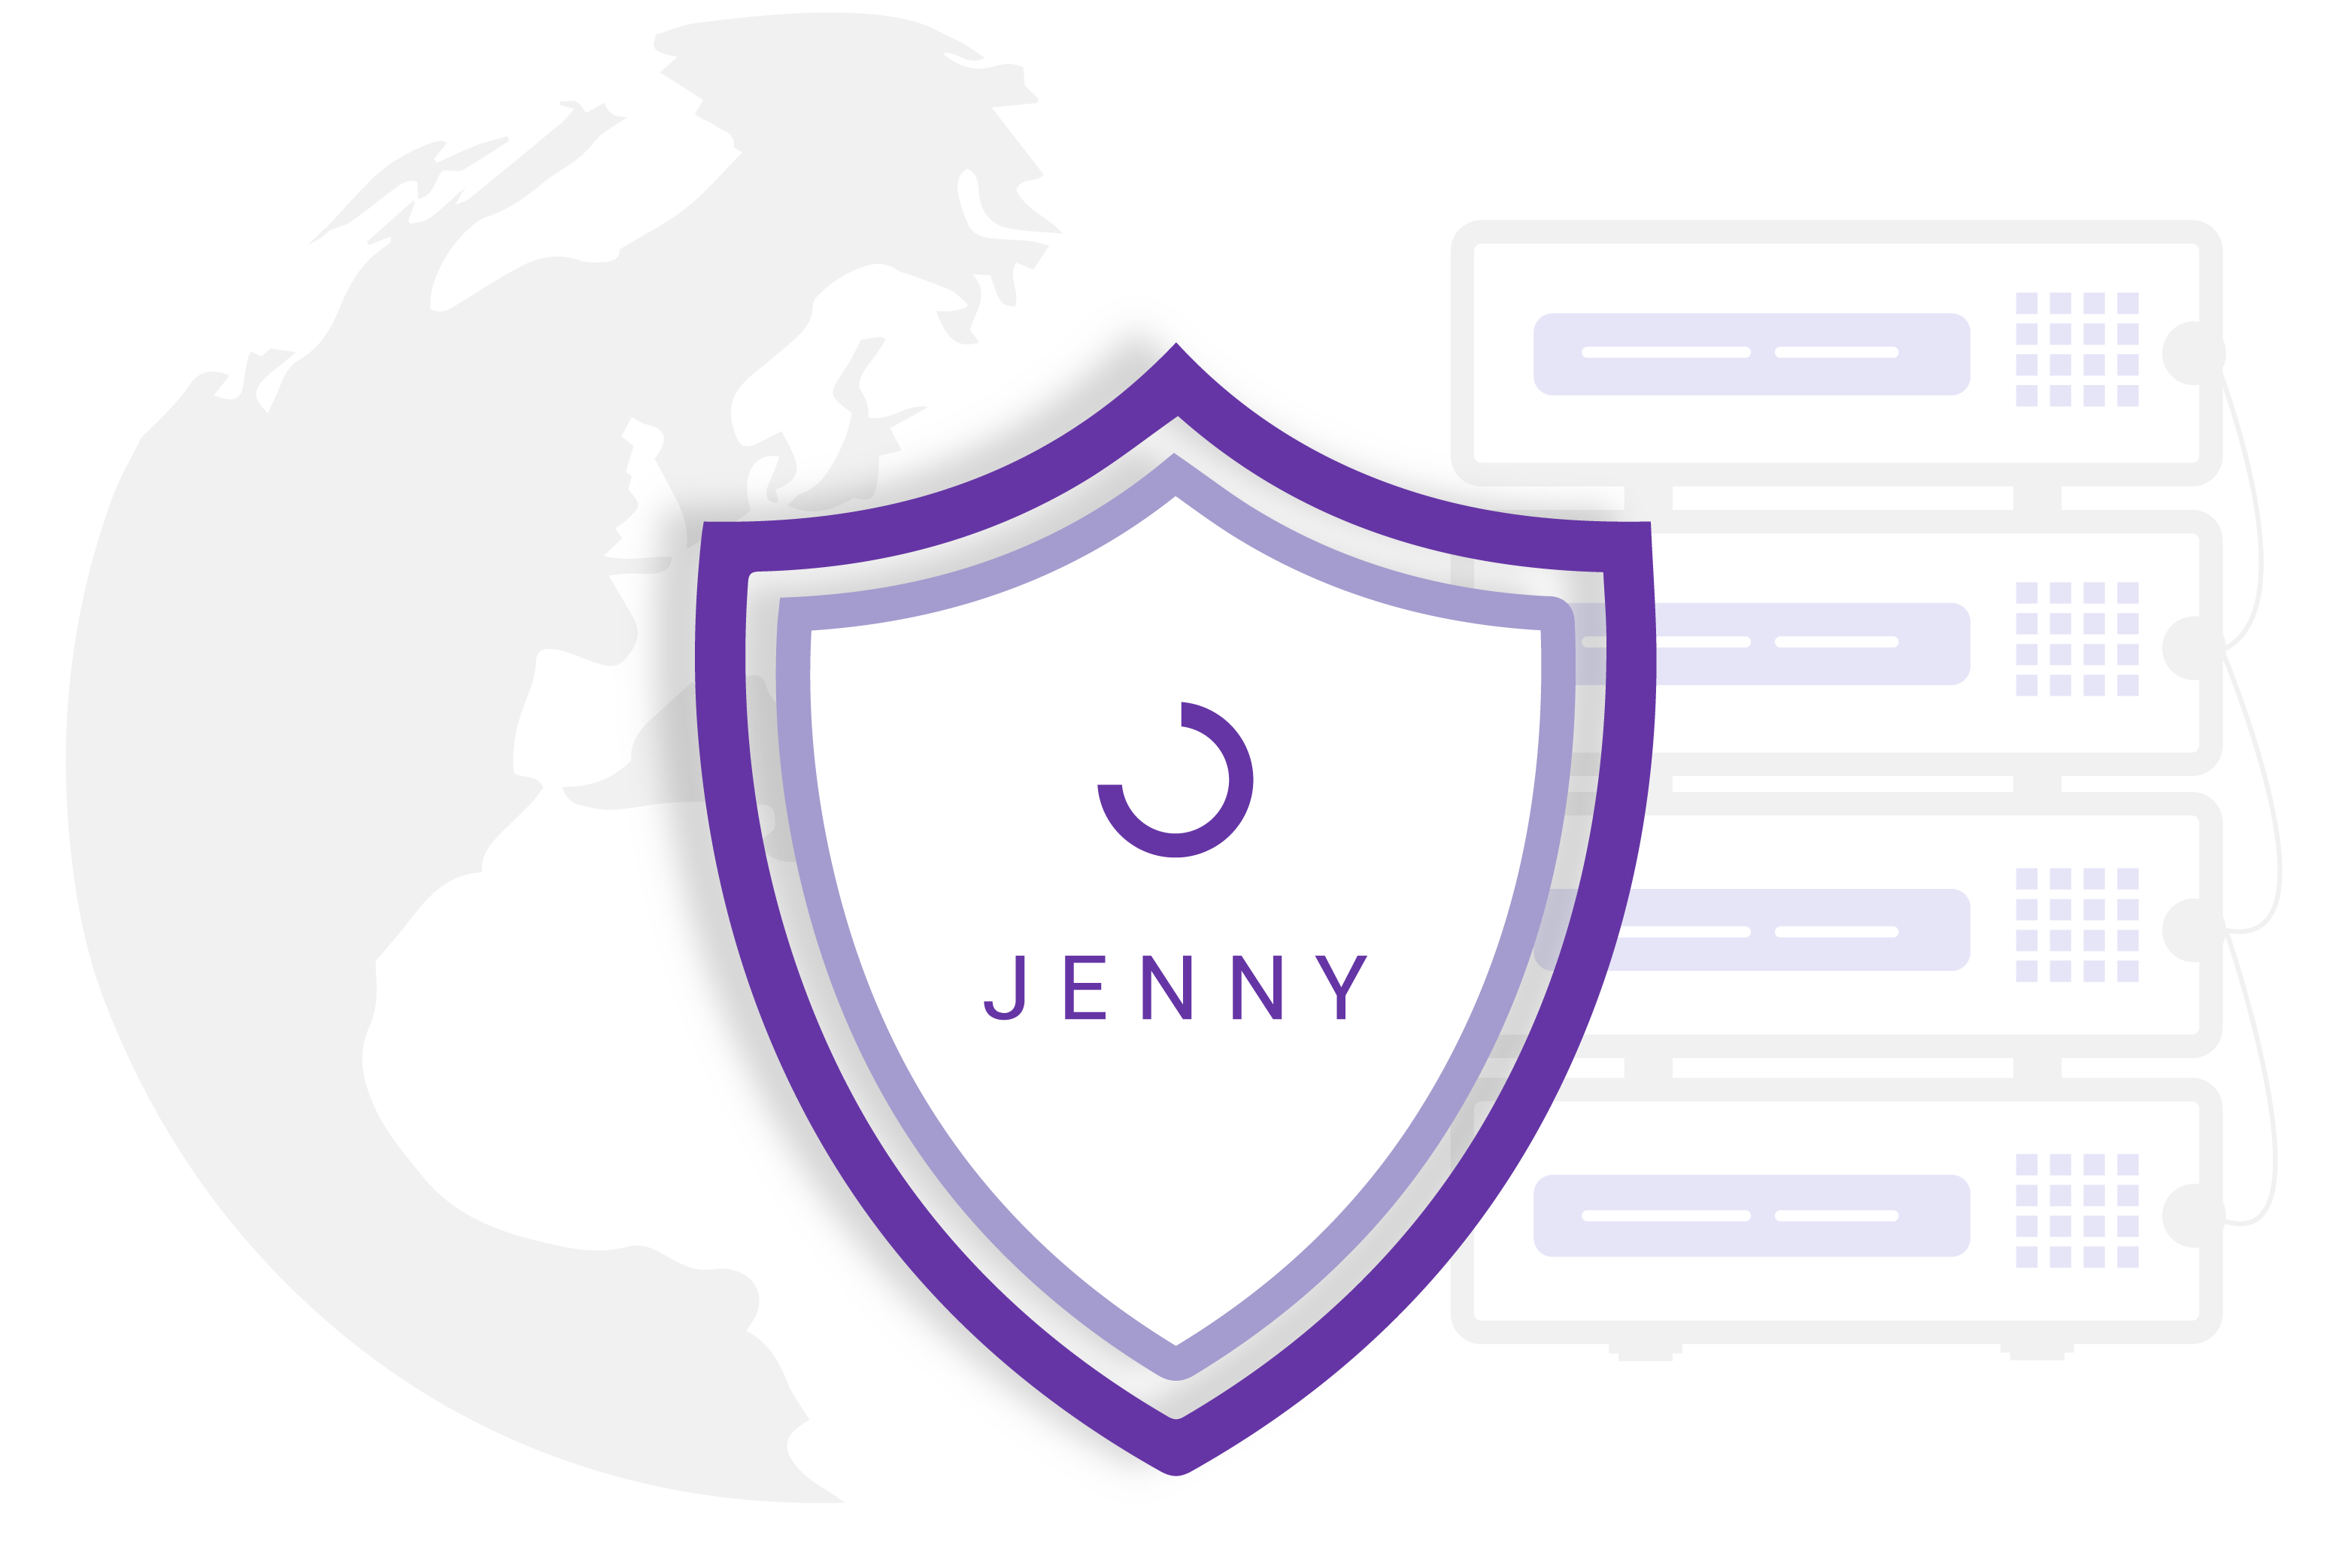 GetJenny chatbots hosted on world-class data centers